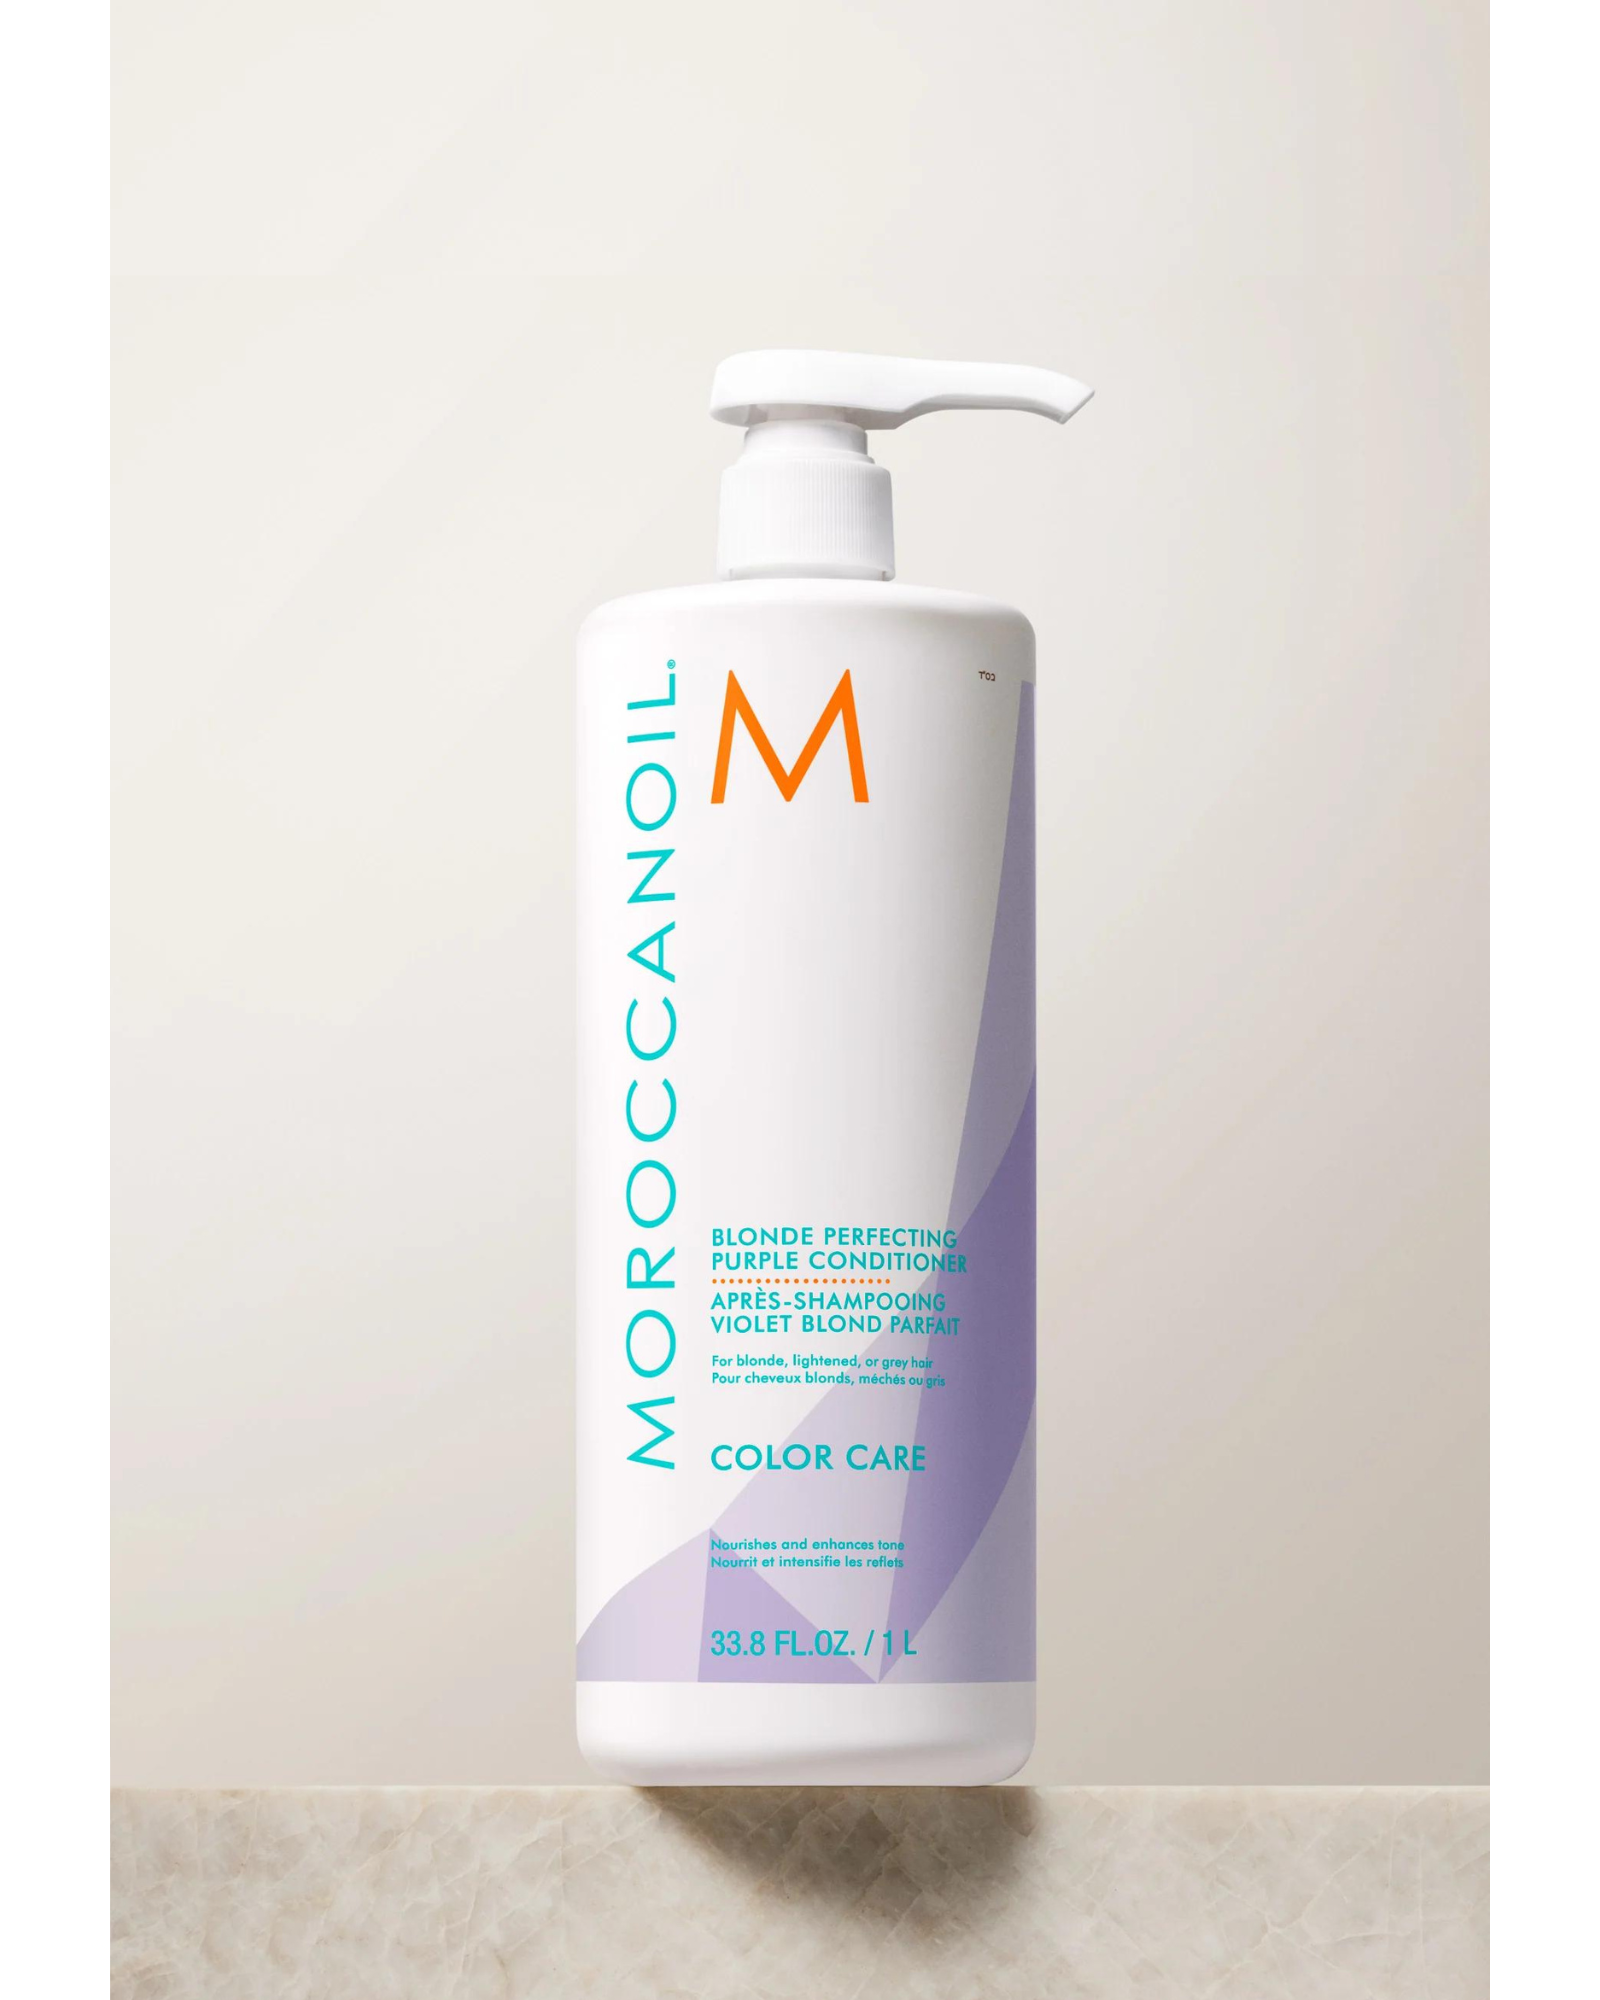 Toning conditioner for blondes (MoroccanOil Blonde Perfecting Purple Conditioner)